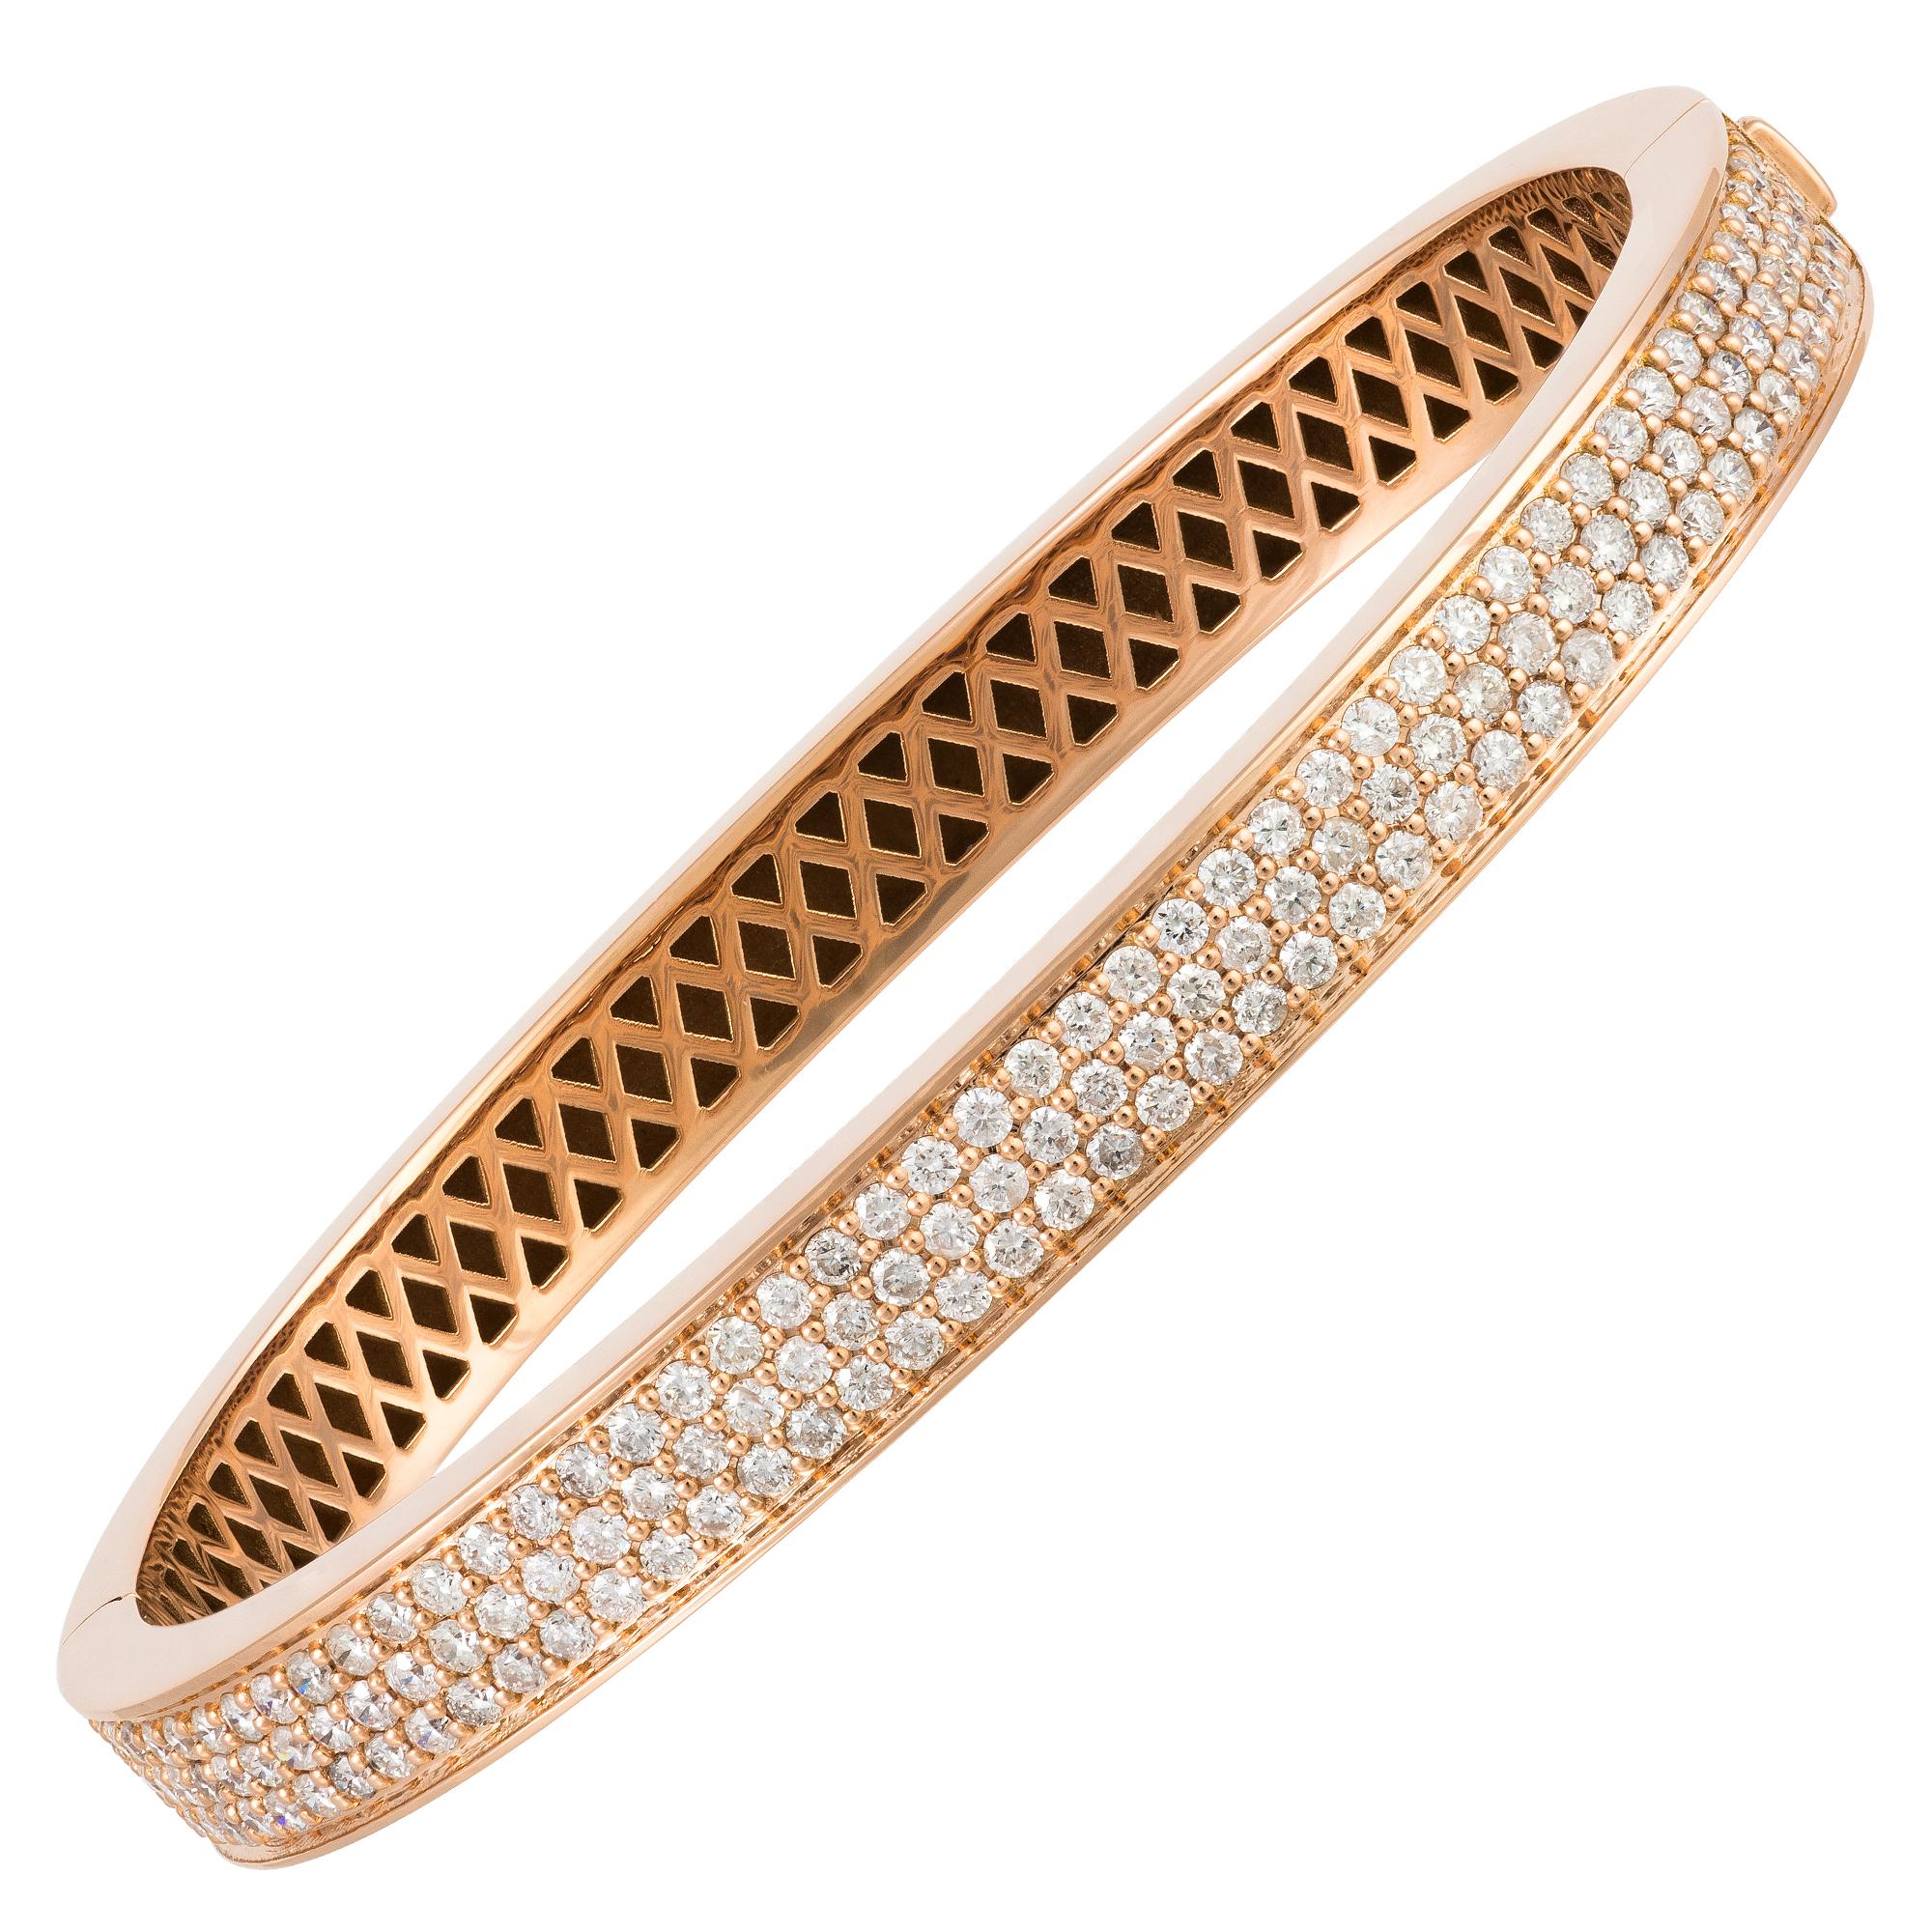 The Following Item we are offering is a Rare Magnificent Radiant 18KT Gold Large Rare Gorgeous Fancy Diamond Bangle Bracelet. Bracelet is comprised of Beautiful Glittering Rows of Gorgeous Diamonds!!! T.C.W. Approx 2.10CTS!!! This Gorgeous Bangle is